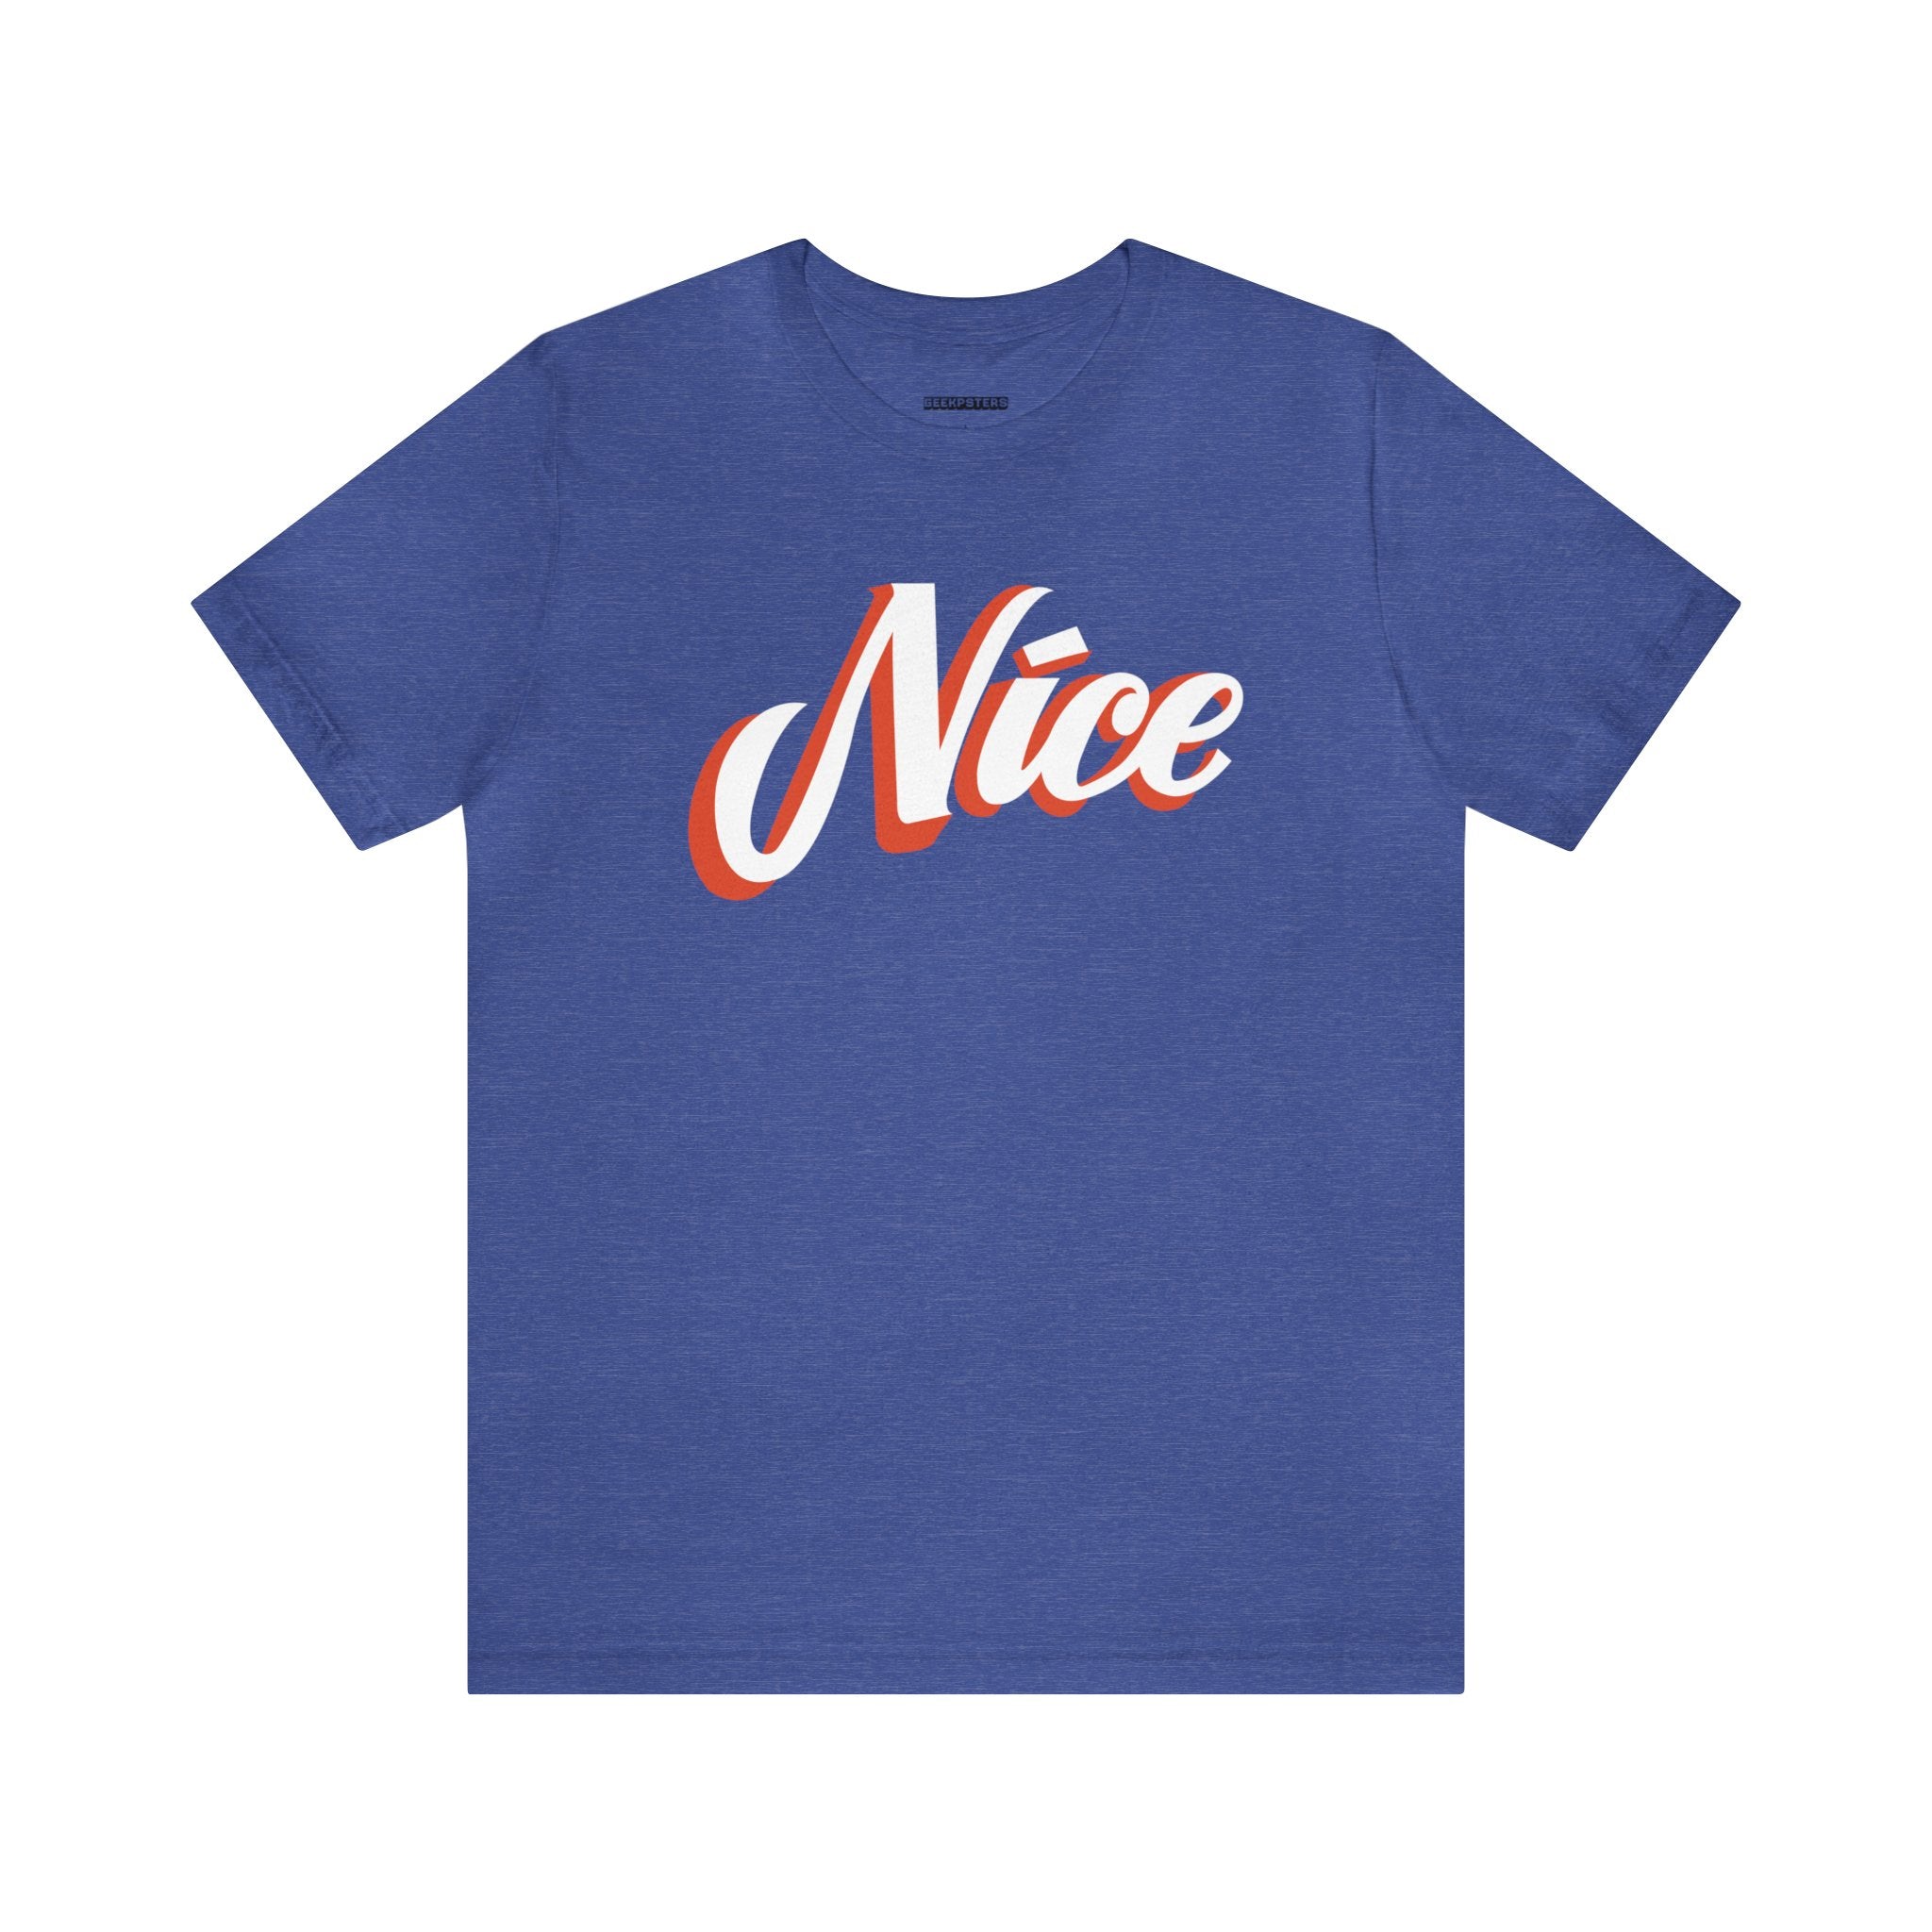 A geeky Nice T-Shirt in a vibrant blue color with the word "nice" printed on it.